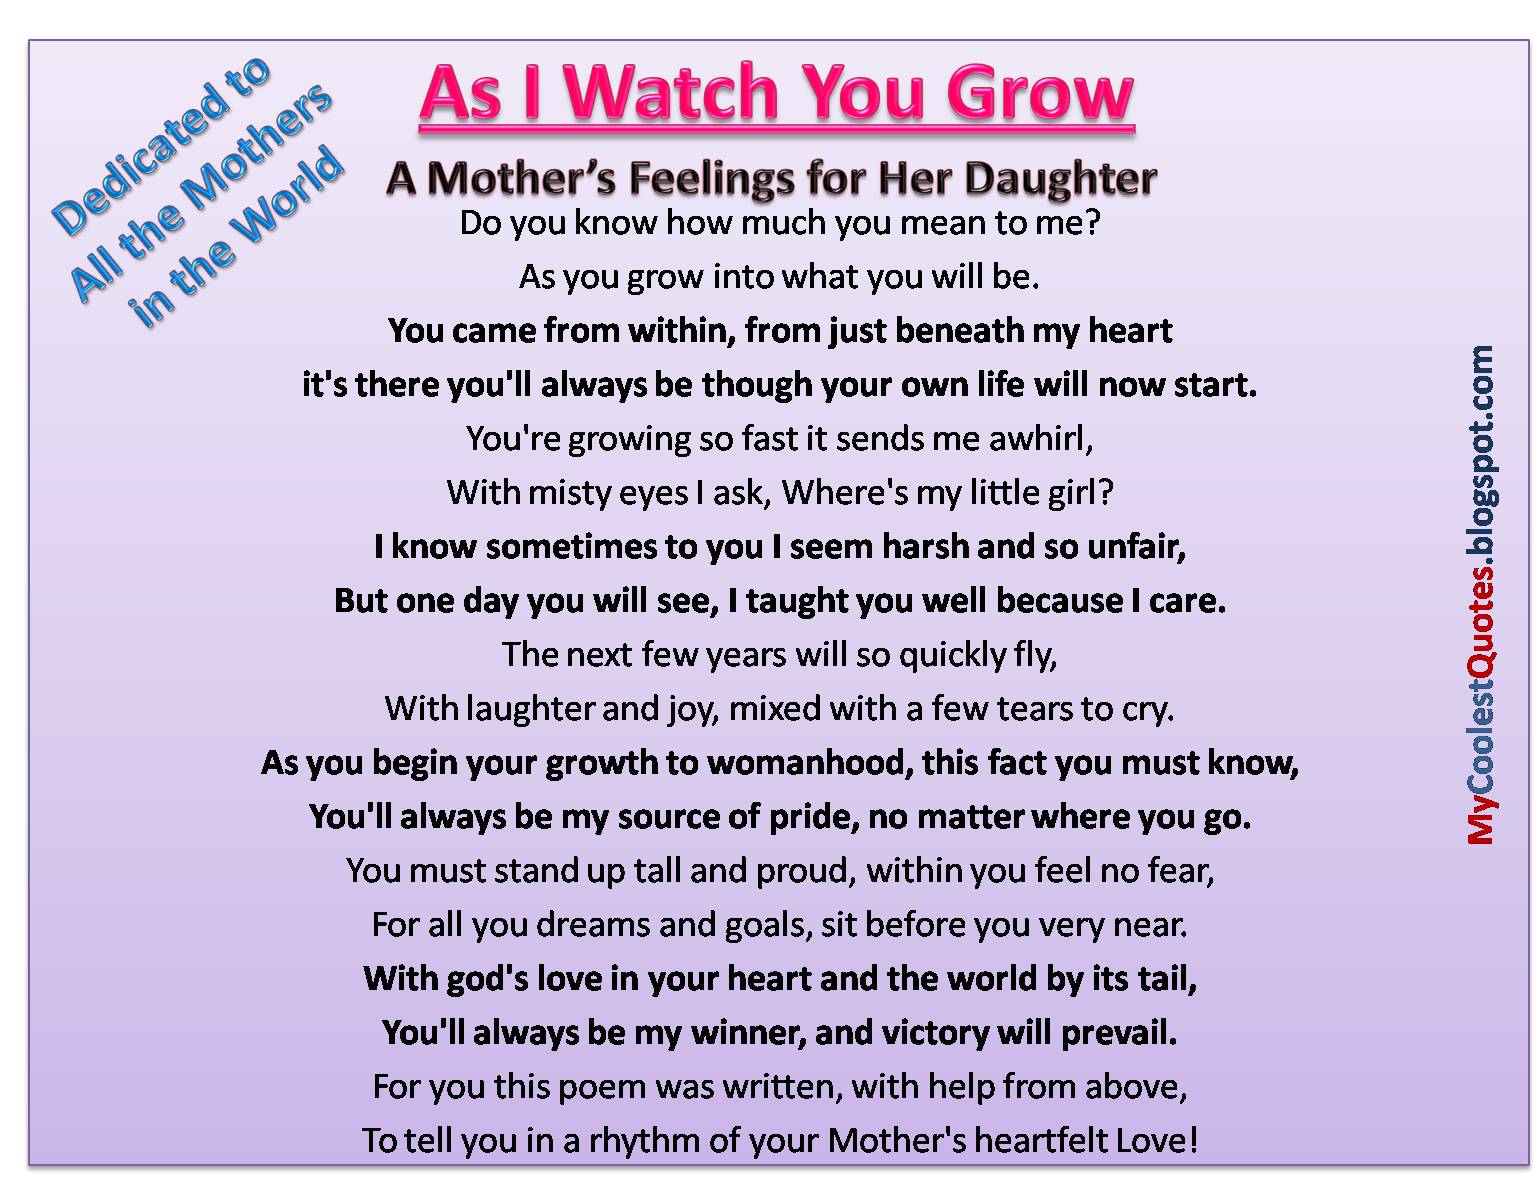 A Mother s Feelings for Her Daughter AS I WATCH YOU